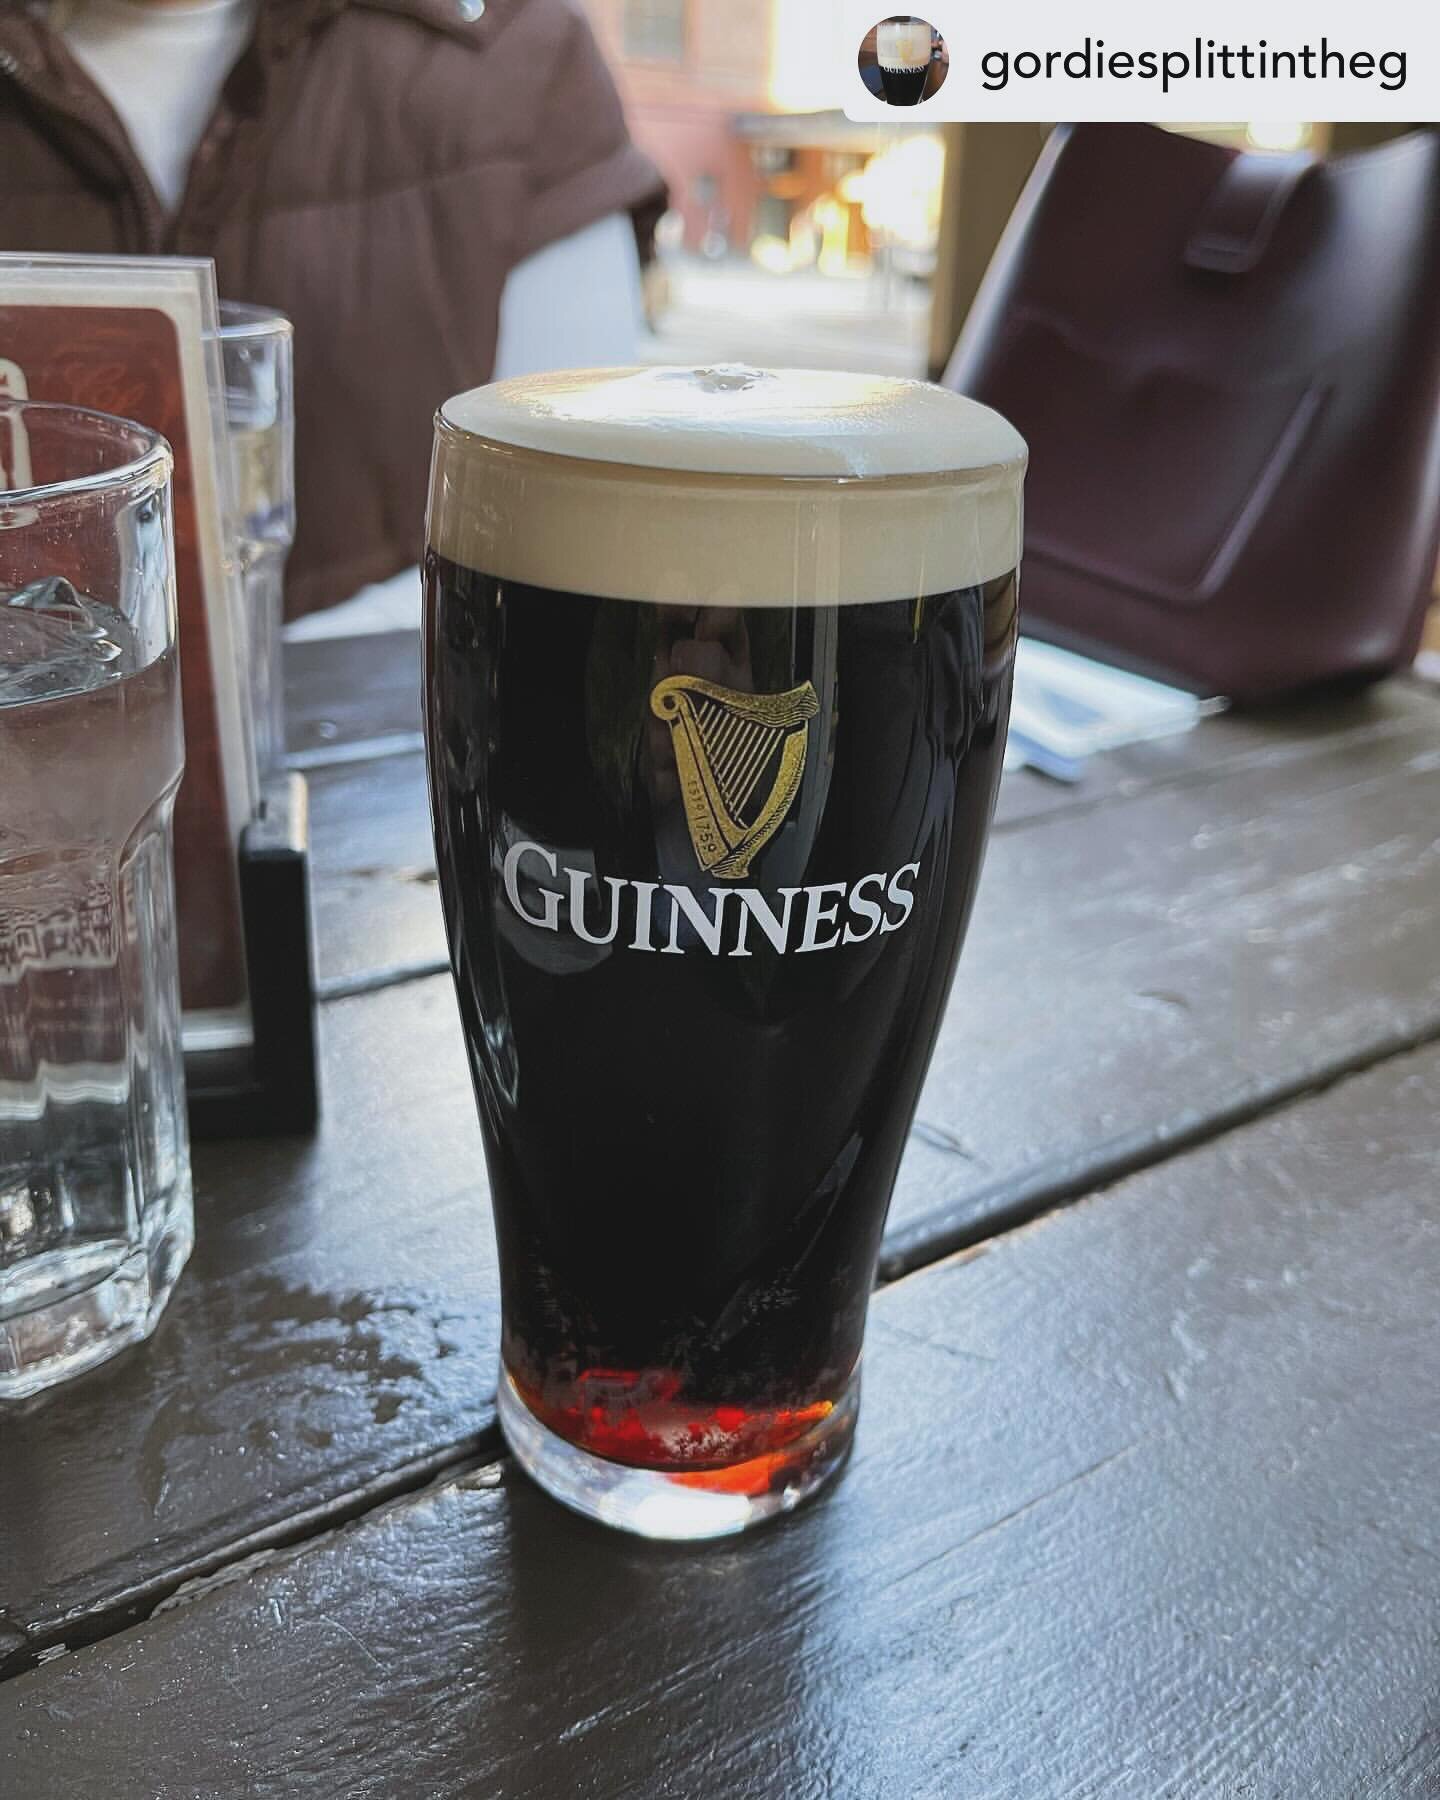 We know it&rsquo;s not just for St. Patrick&rsquo;s Day&hellip;Guinness is great ALL YEAR LONG. Thanks for stopping by! Posted @withregram &bull; @gordiesplittintheg Good scran and good pints. That is what Amsterdam Ale House gives you. I have freque